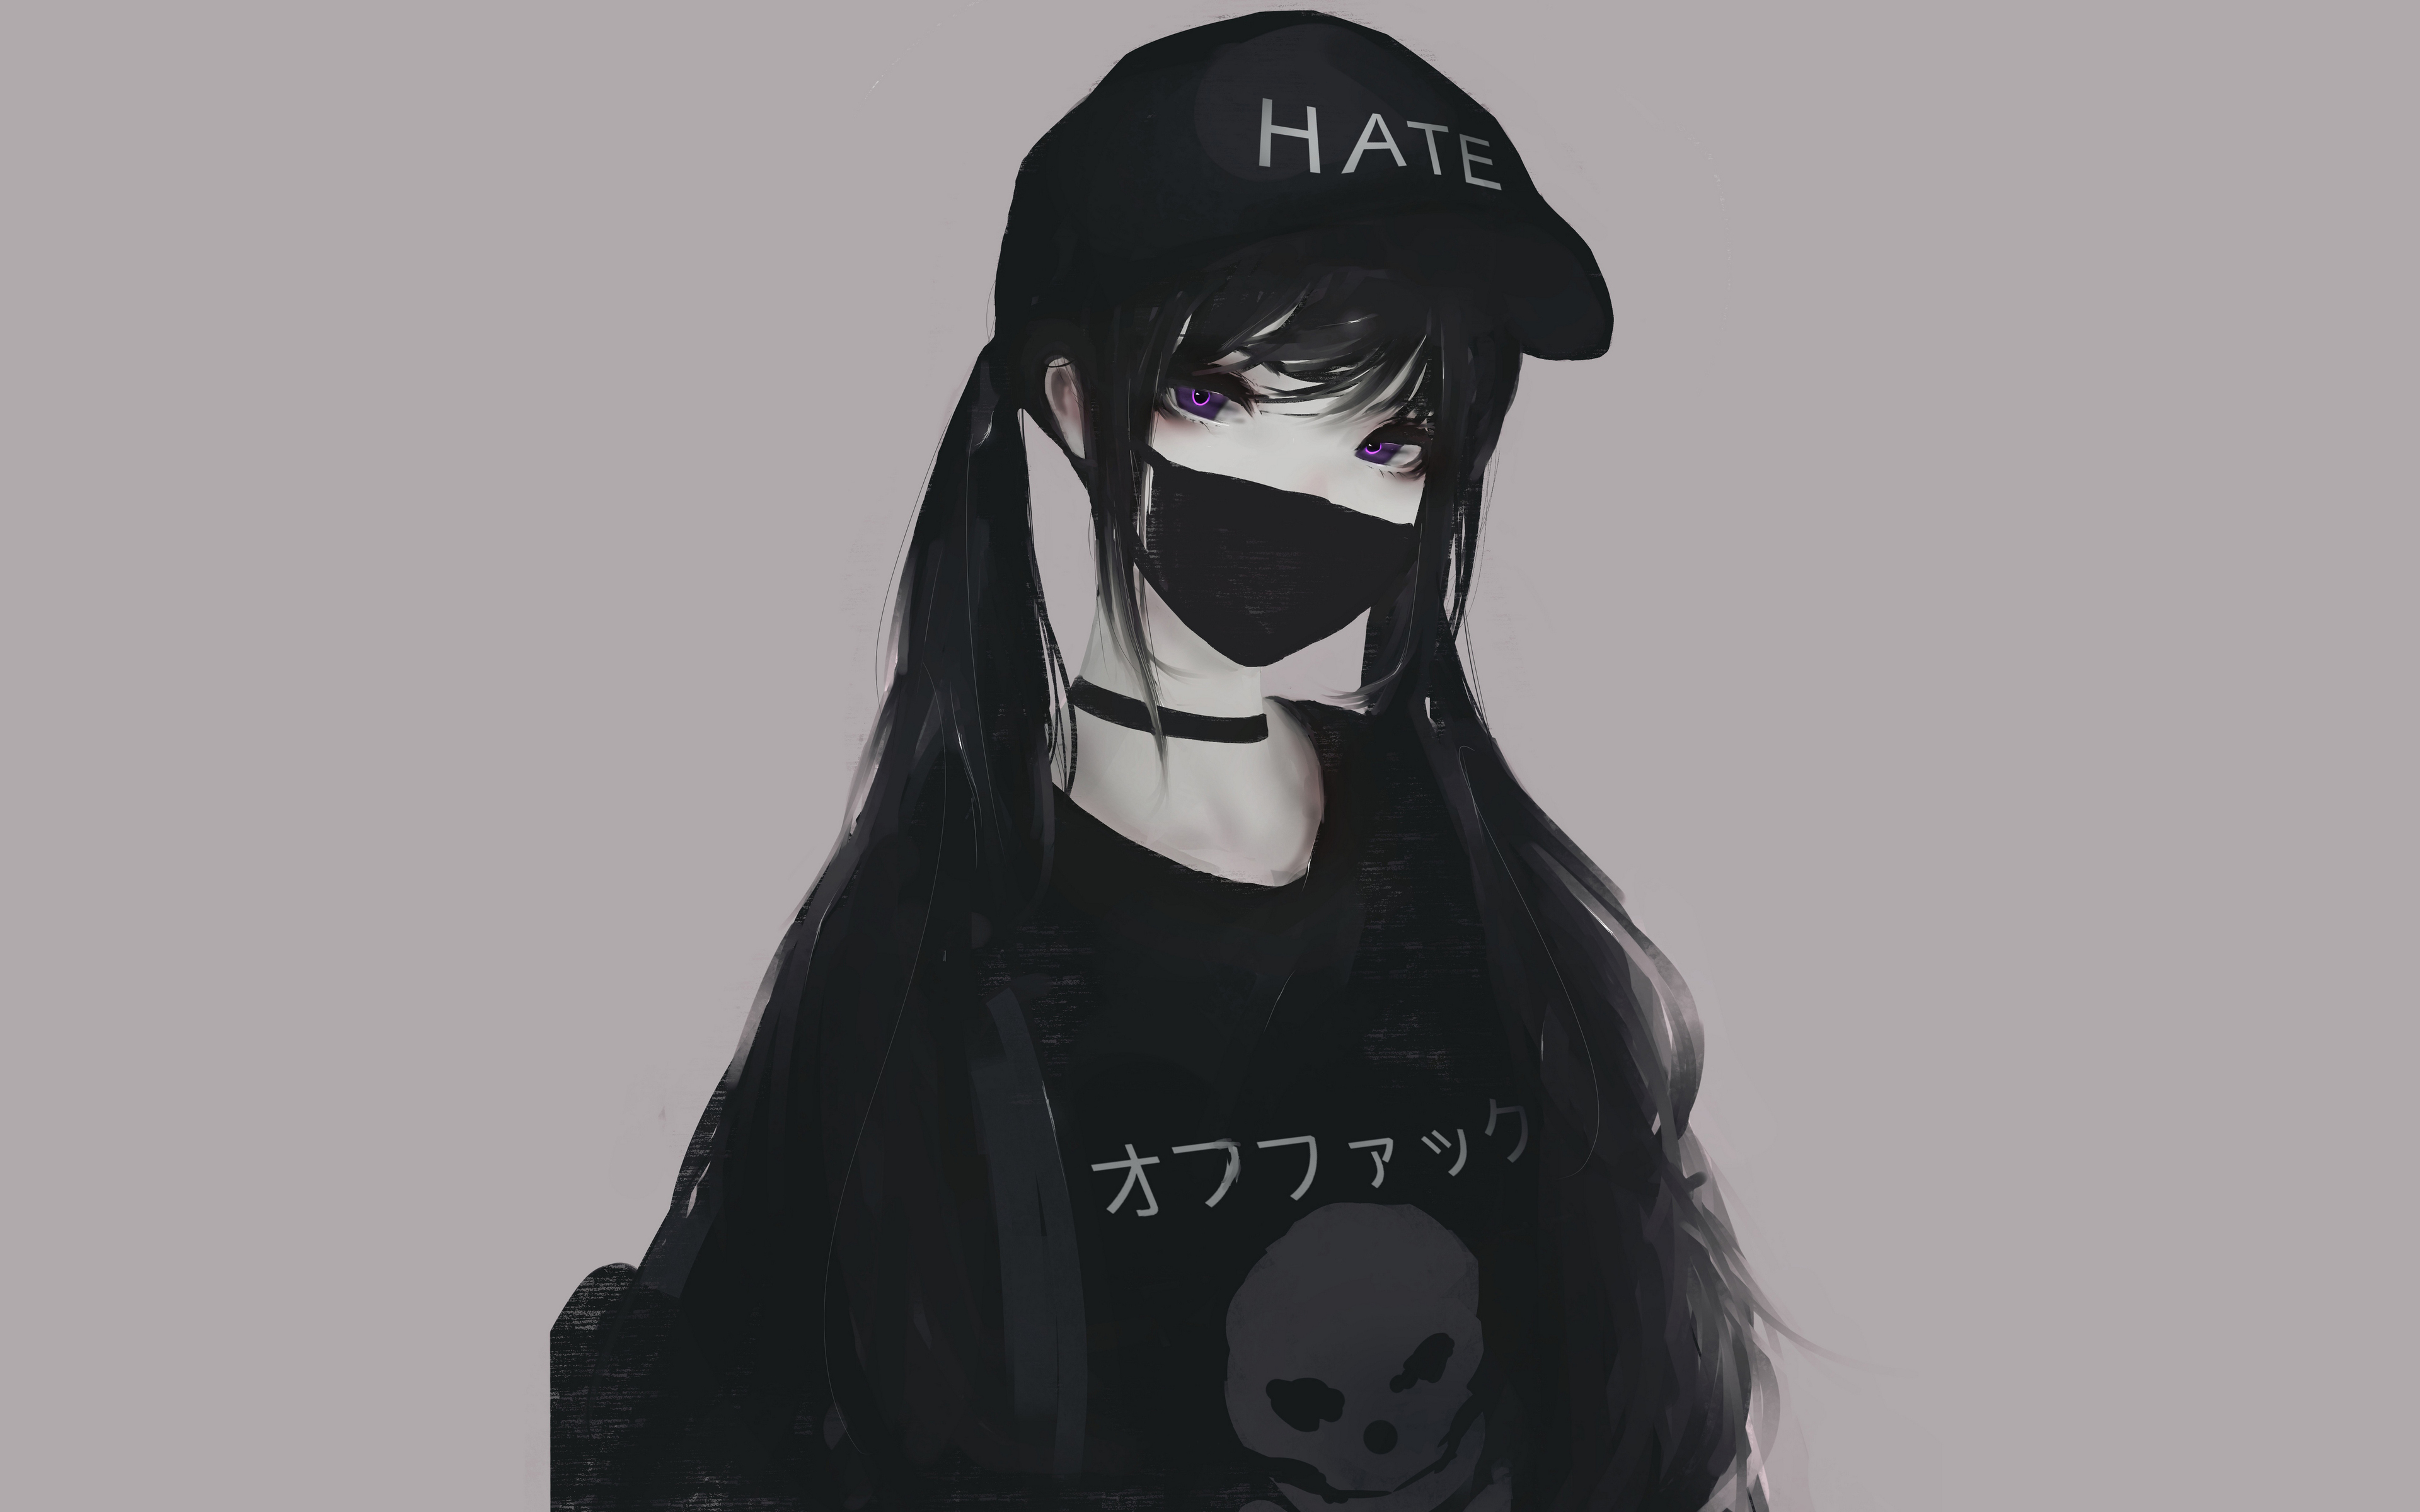 https://hdqwalls.com/download/anime-girl-face-mask-purple-eyes-twintails-hate-5k-79-3840x2400.jpg